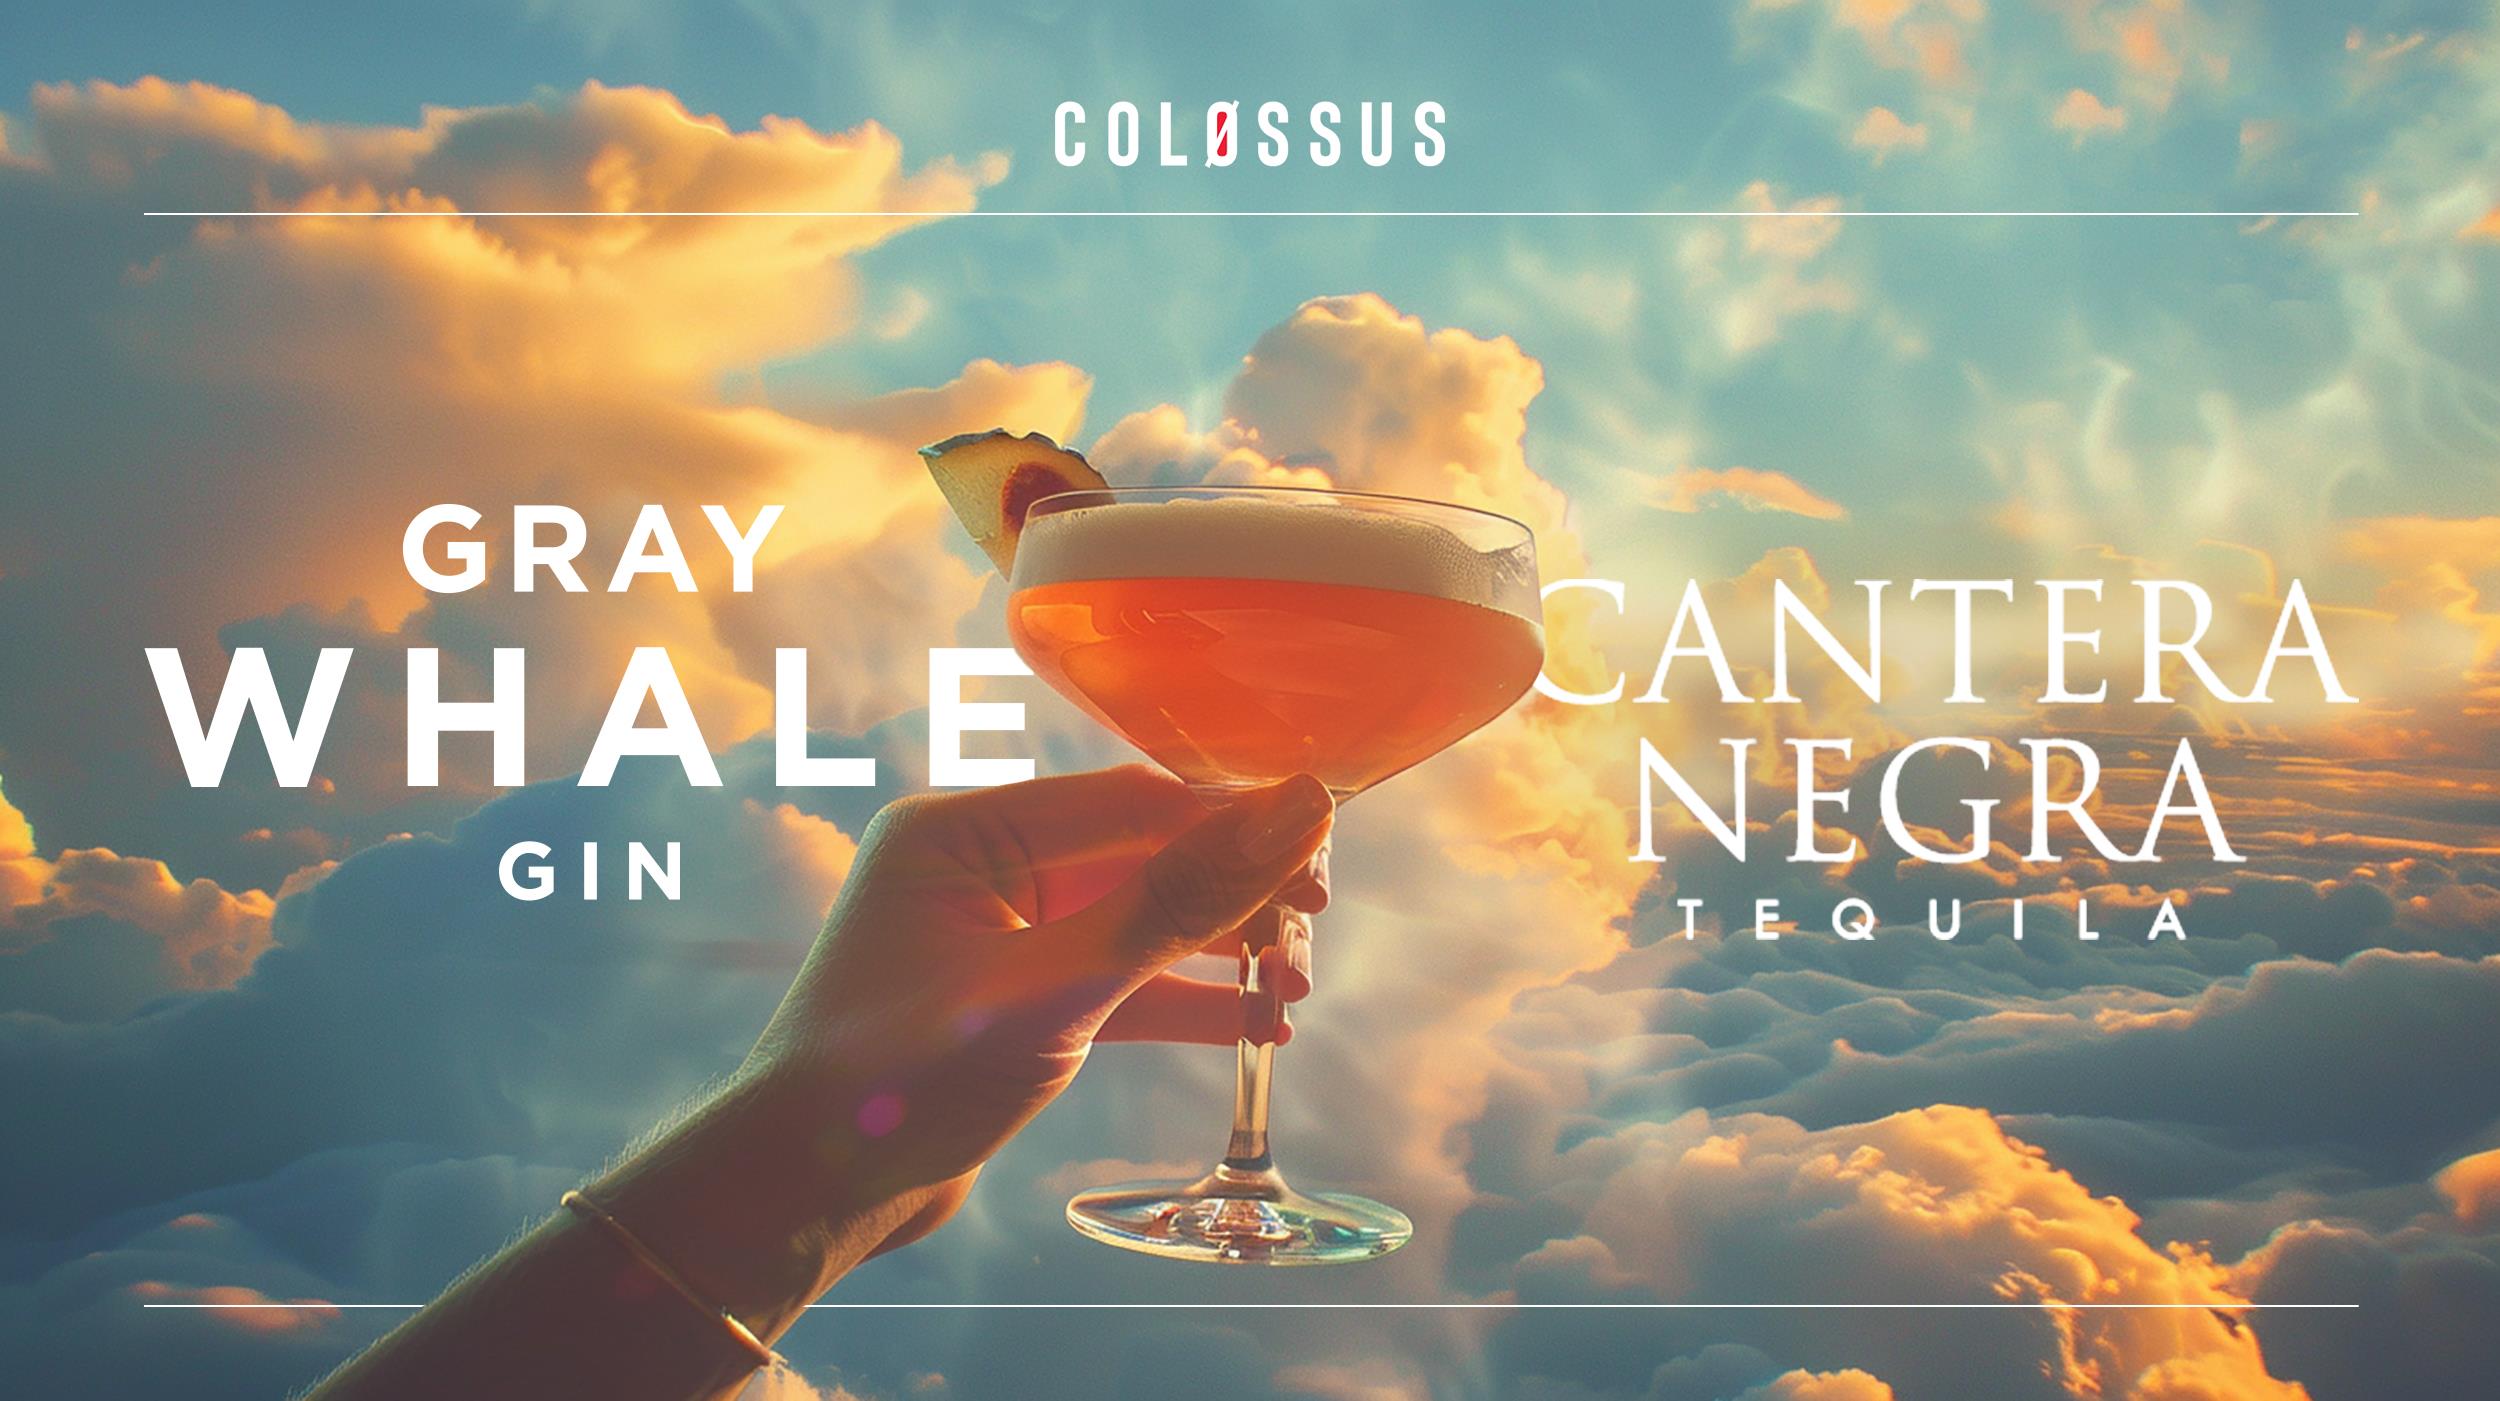 Colossus Wins Creative Duties for Cantera Negra Tequila and Gray Whale Gin 